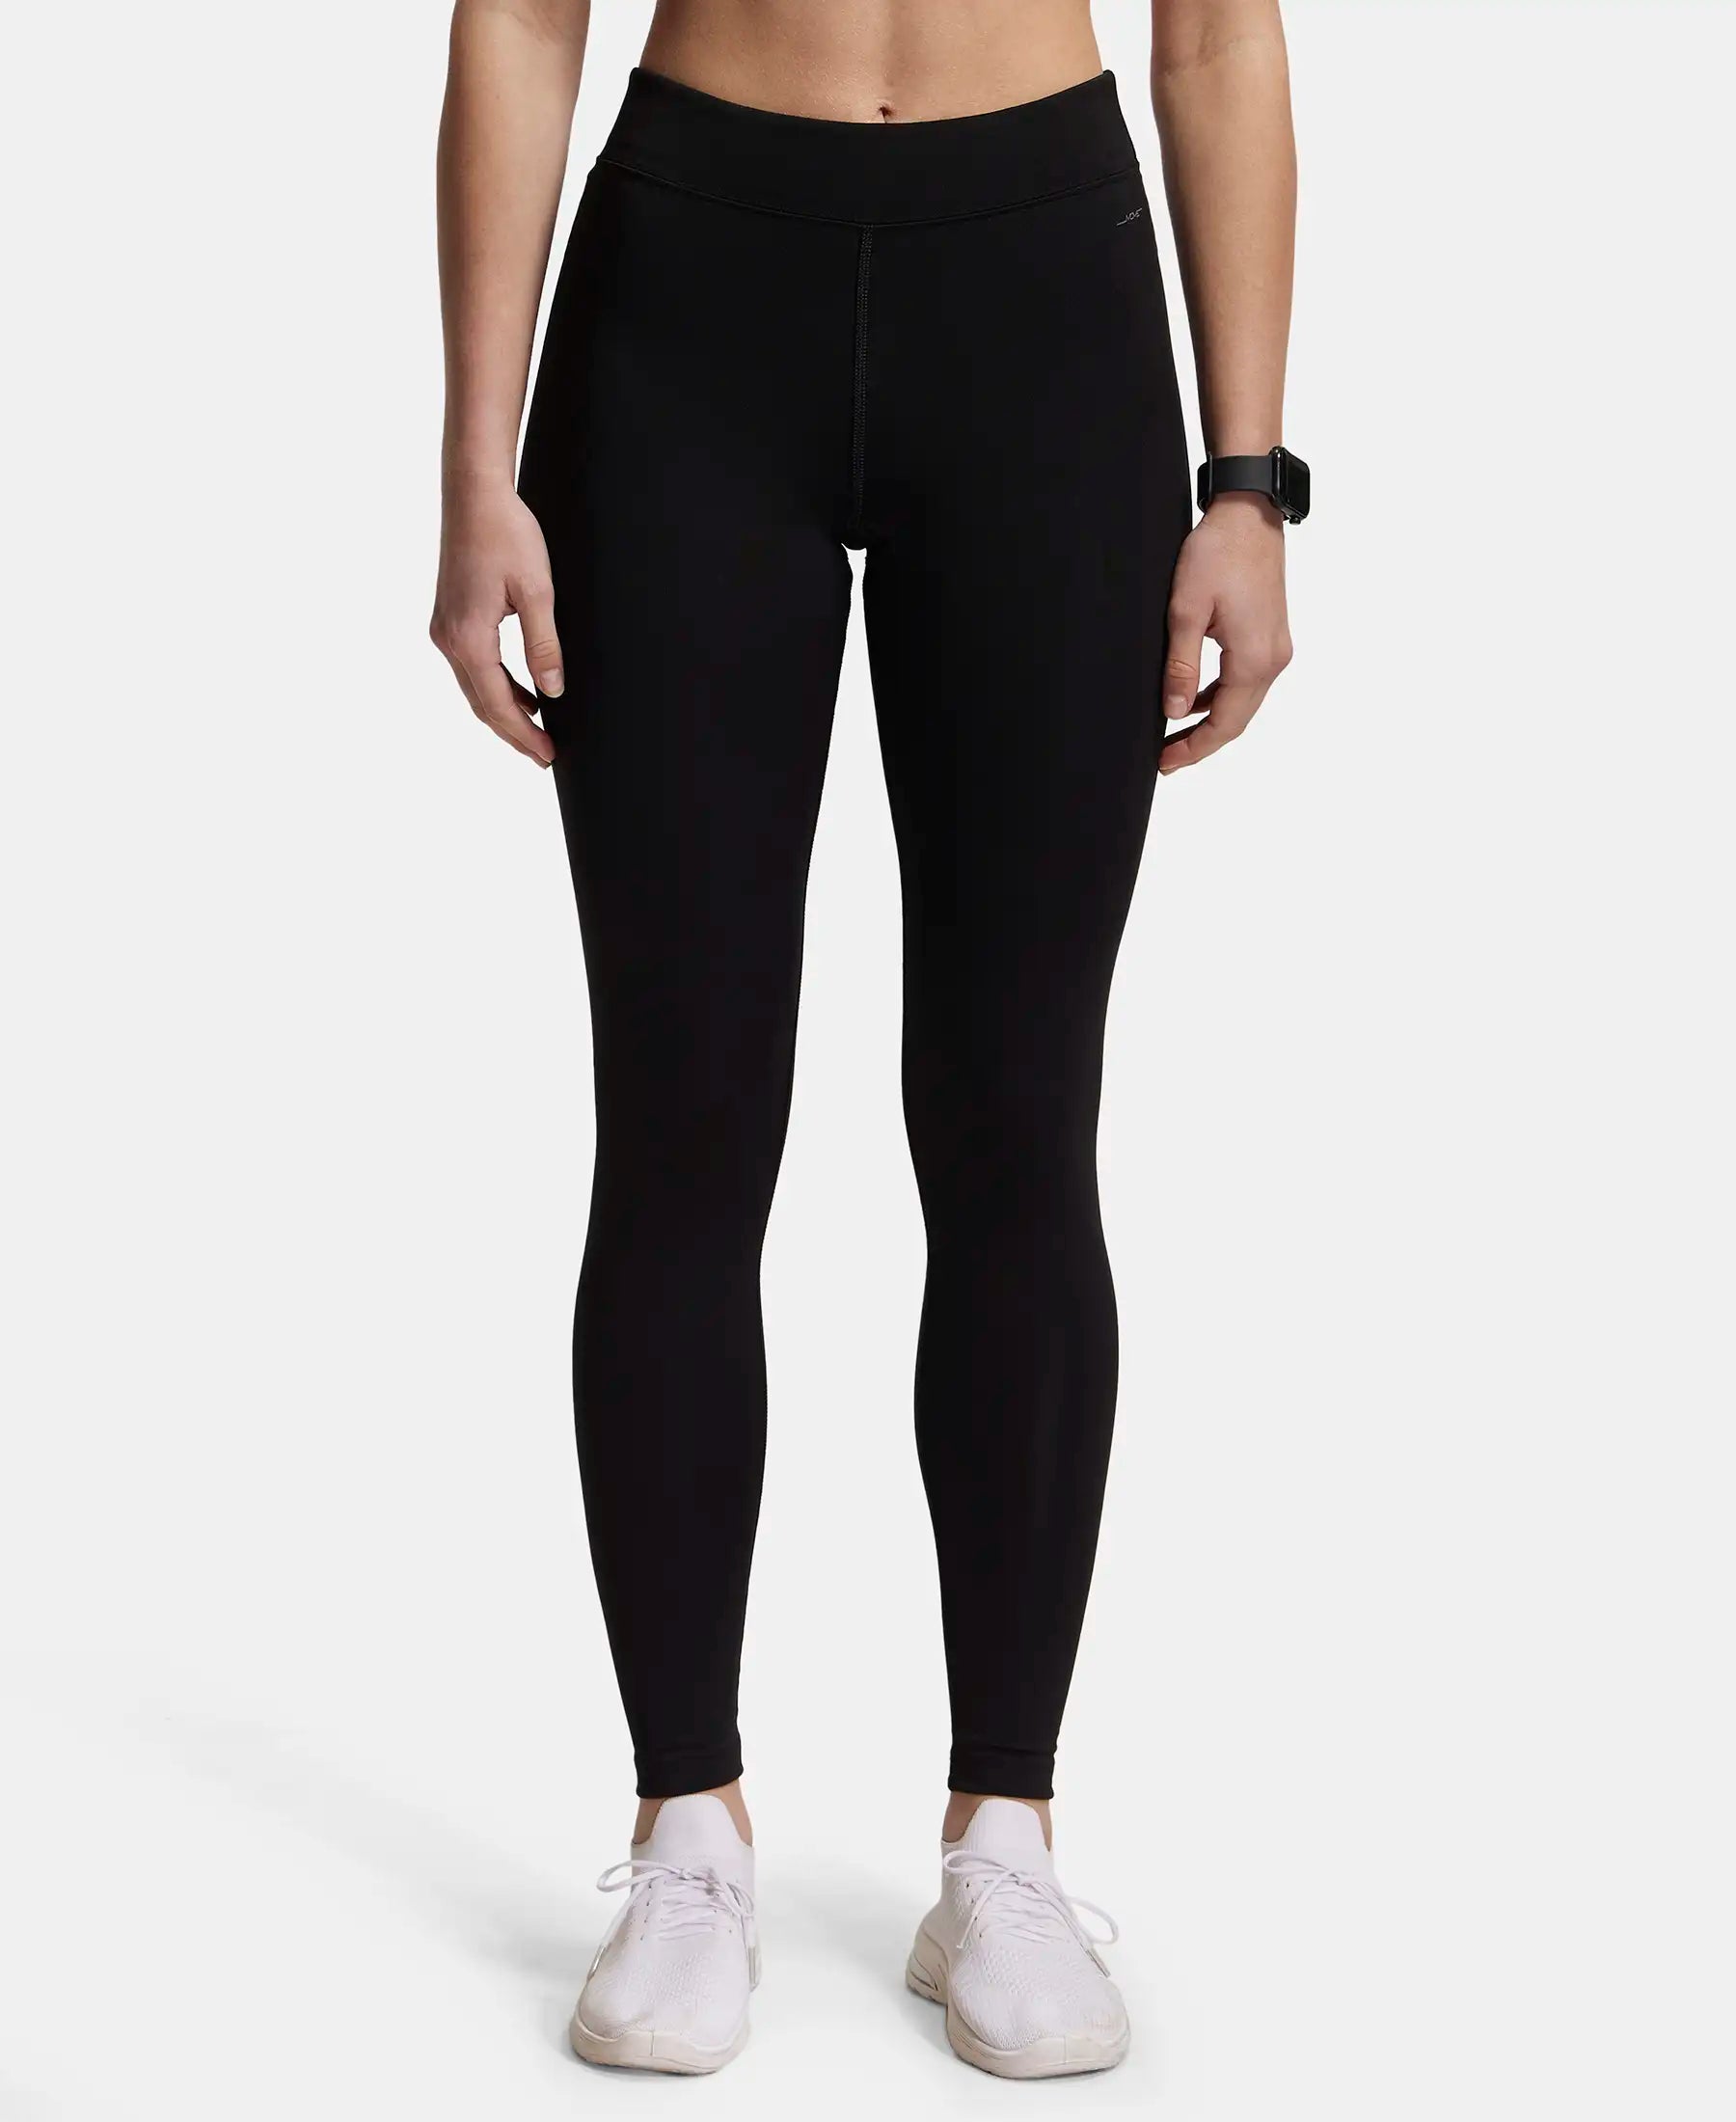 Jockey Women Legging - Get Best Price from Manufacturers & Suppliers in  India